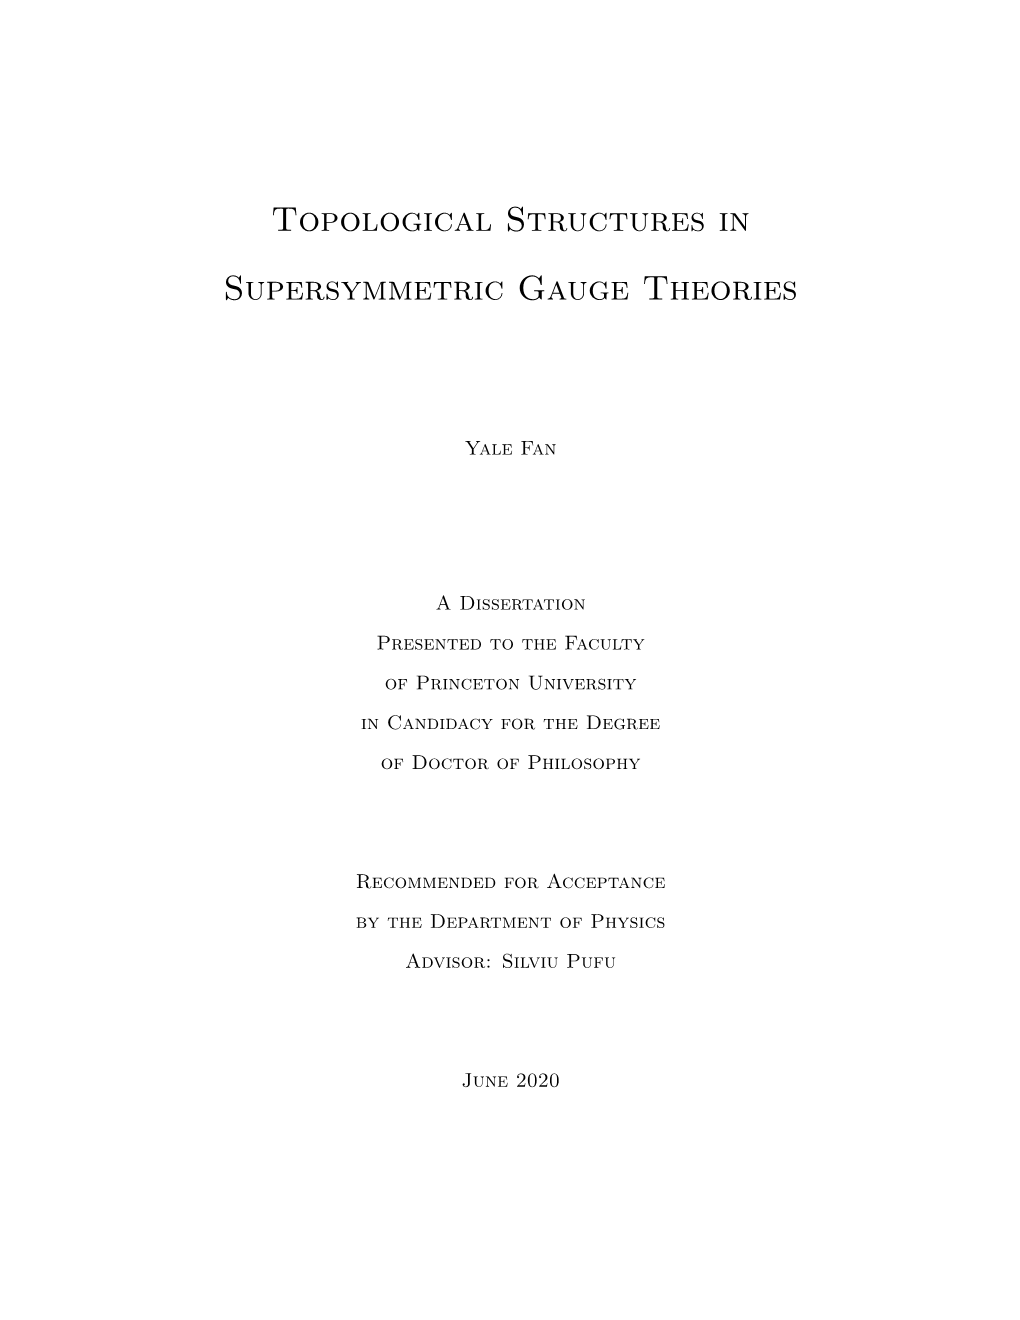 Topological Structures in Supersymmetric Gauge Theories